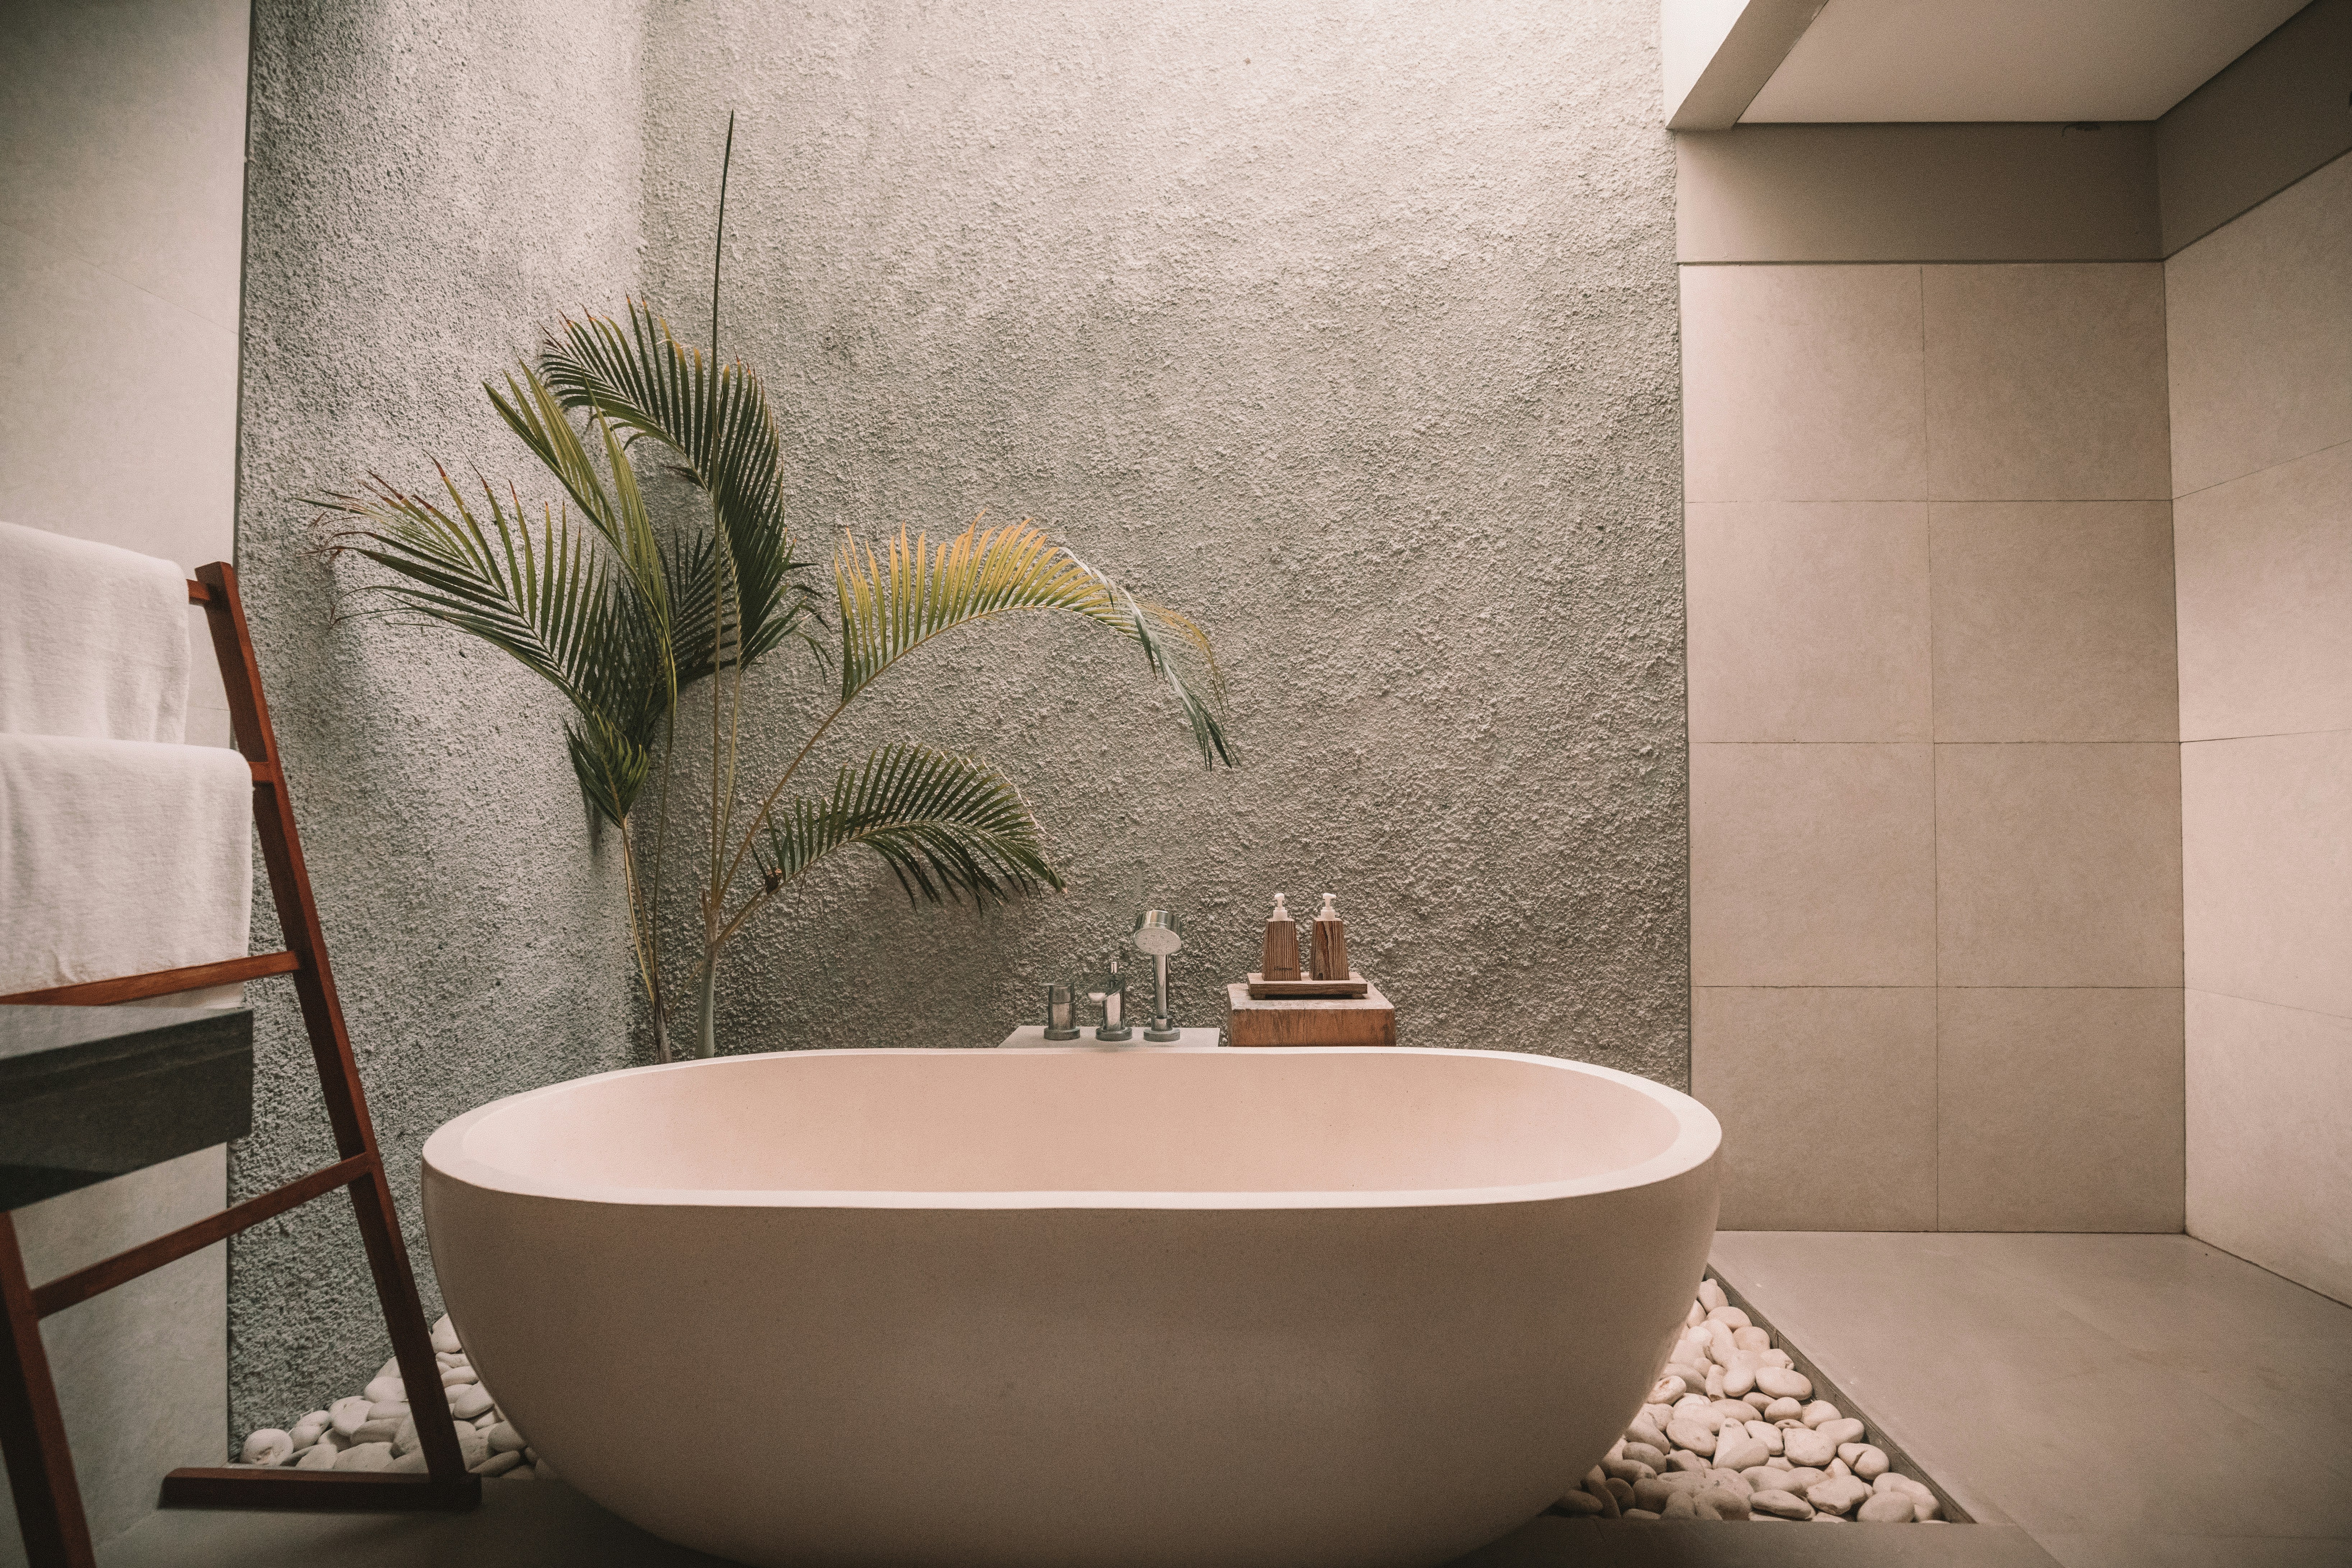 The options are endless when it comes to bathroom design, and there’s always room to get creative. This design concept imagines a relaxing, spa-like retreat using stones to surround a freestanding bath.